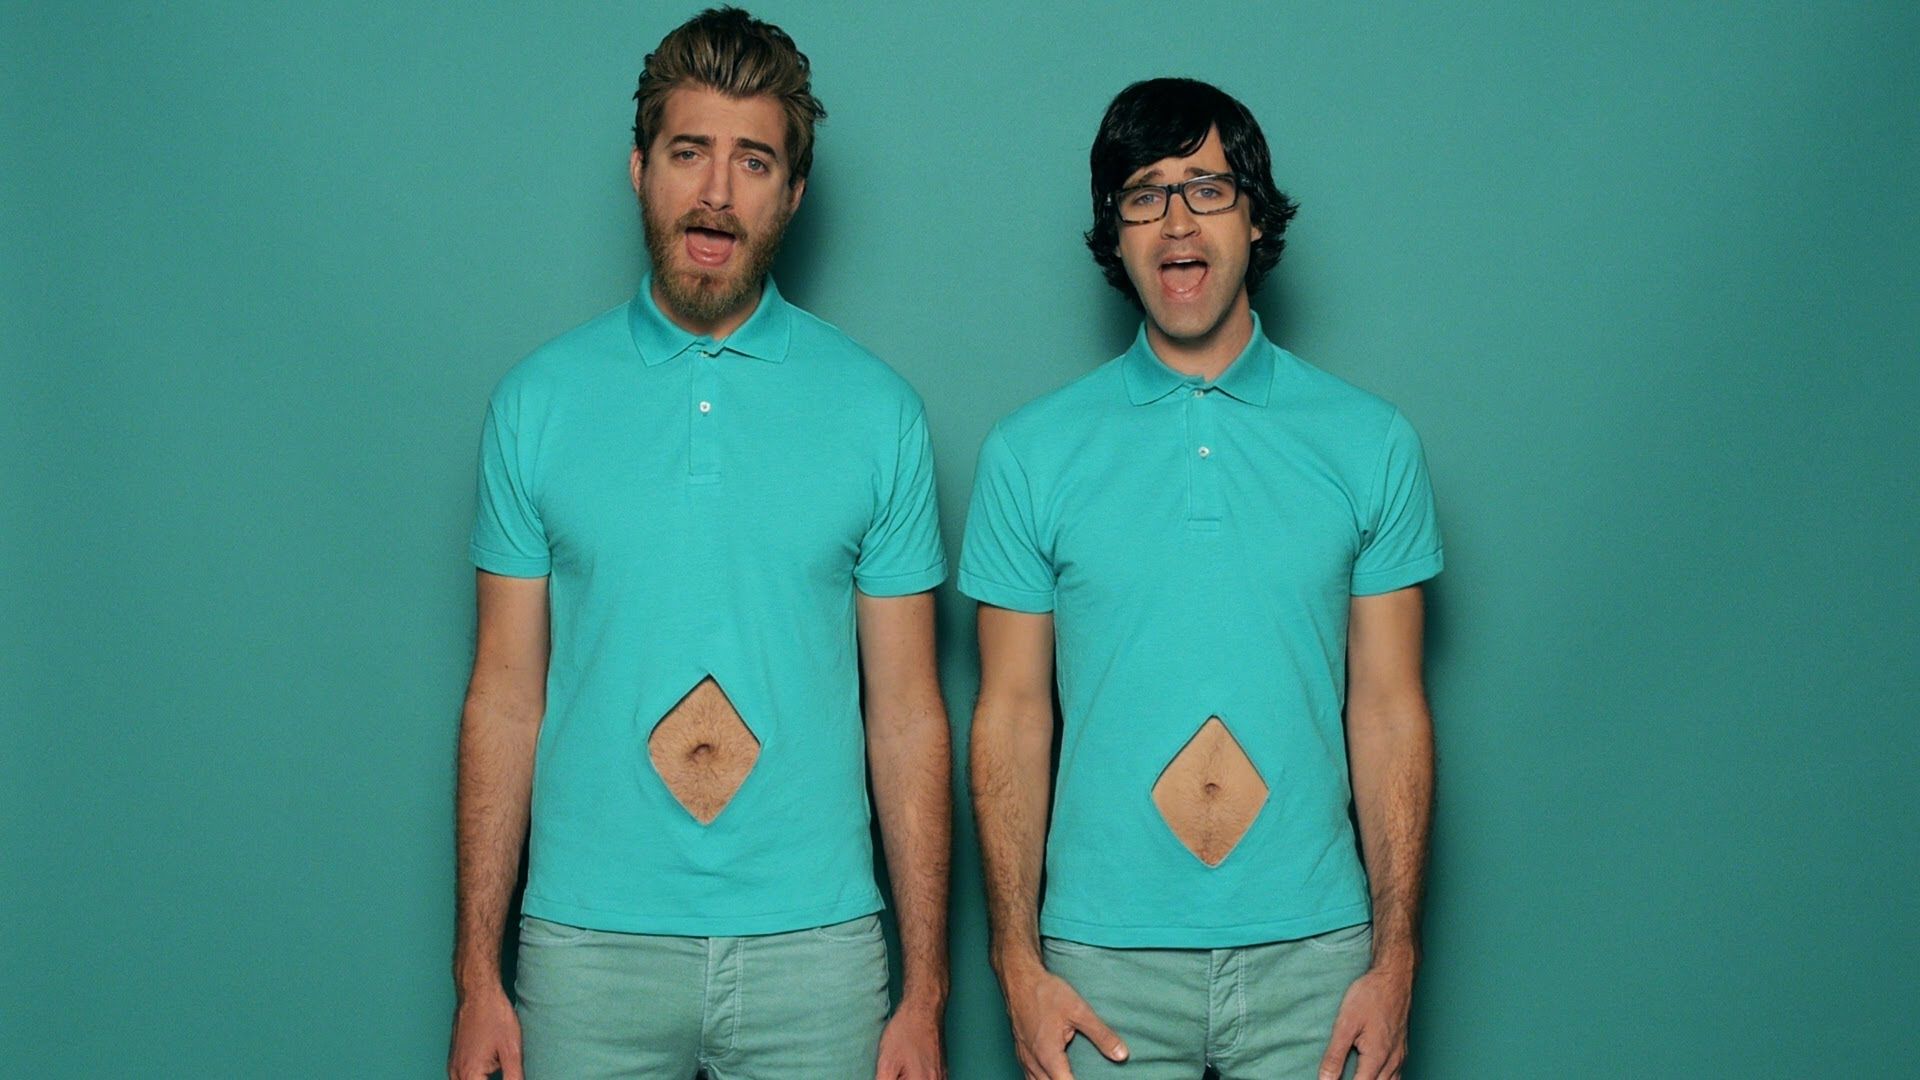 GMM Wallpaper. GMM Wallpaper, GMM Background and GMM Good Mythical Morning Wallpaper